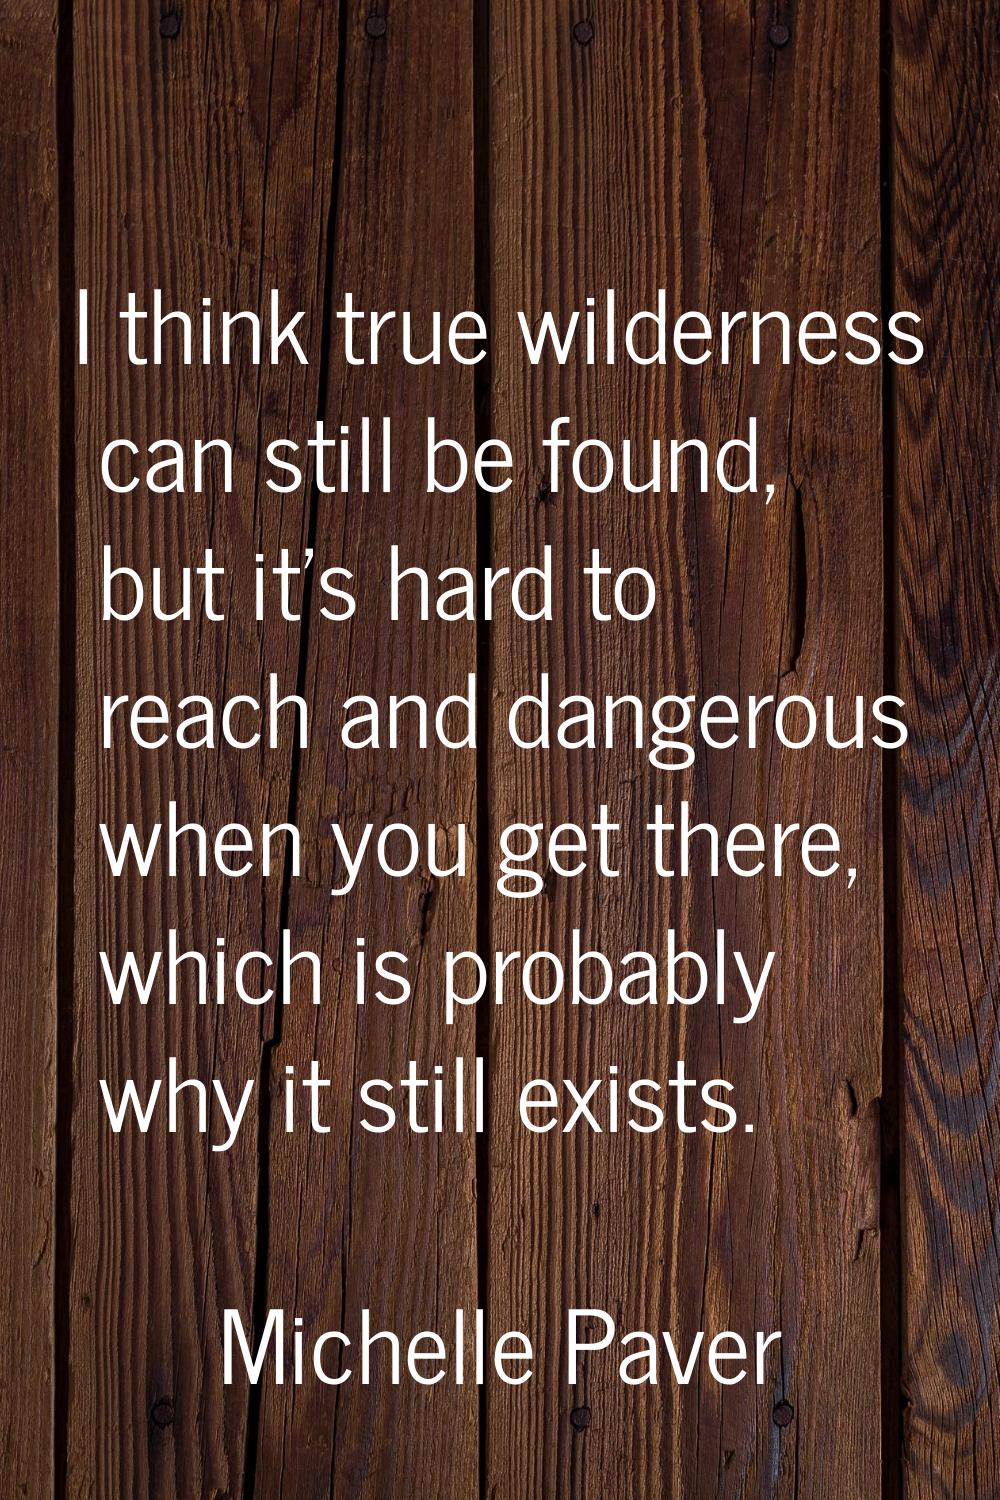 I think true wilderness can still be found, but it's hard to reach and dangerous when you get there